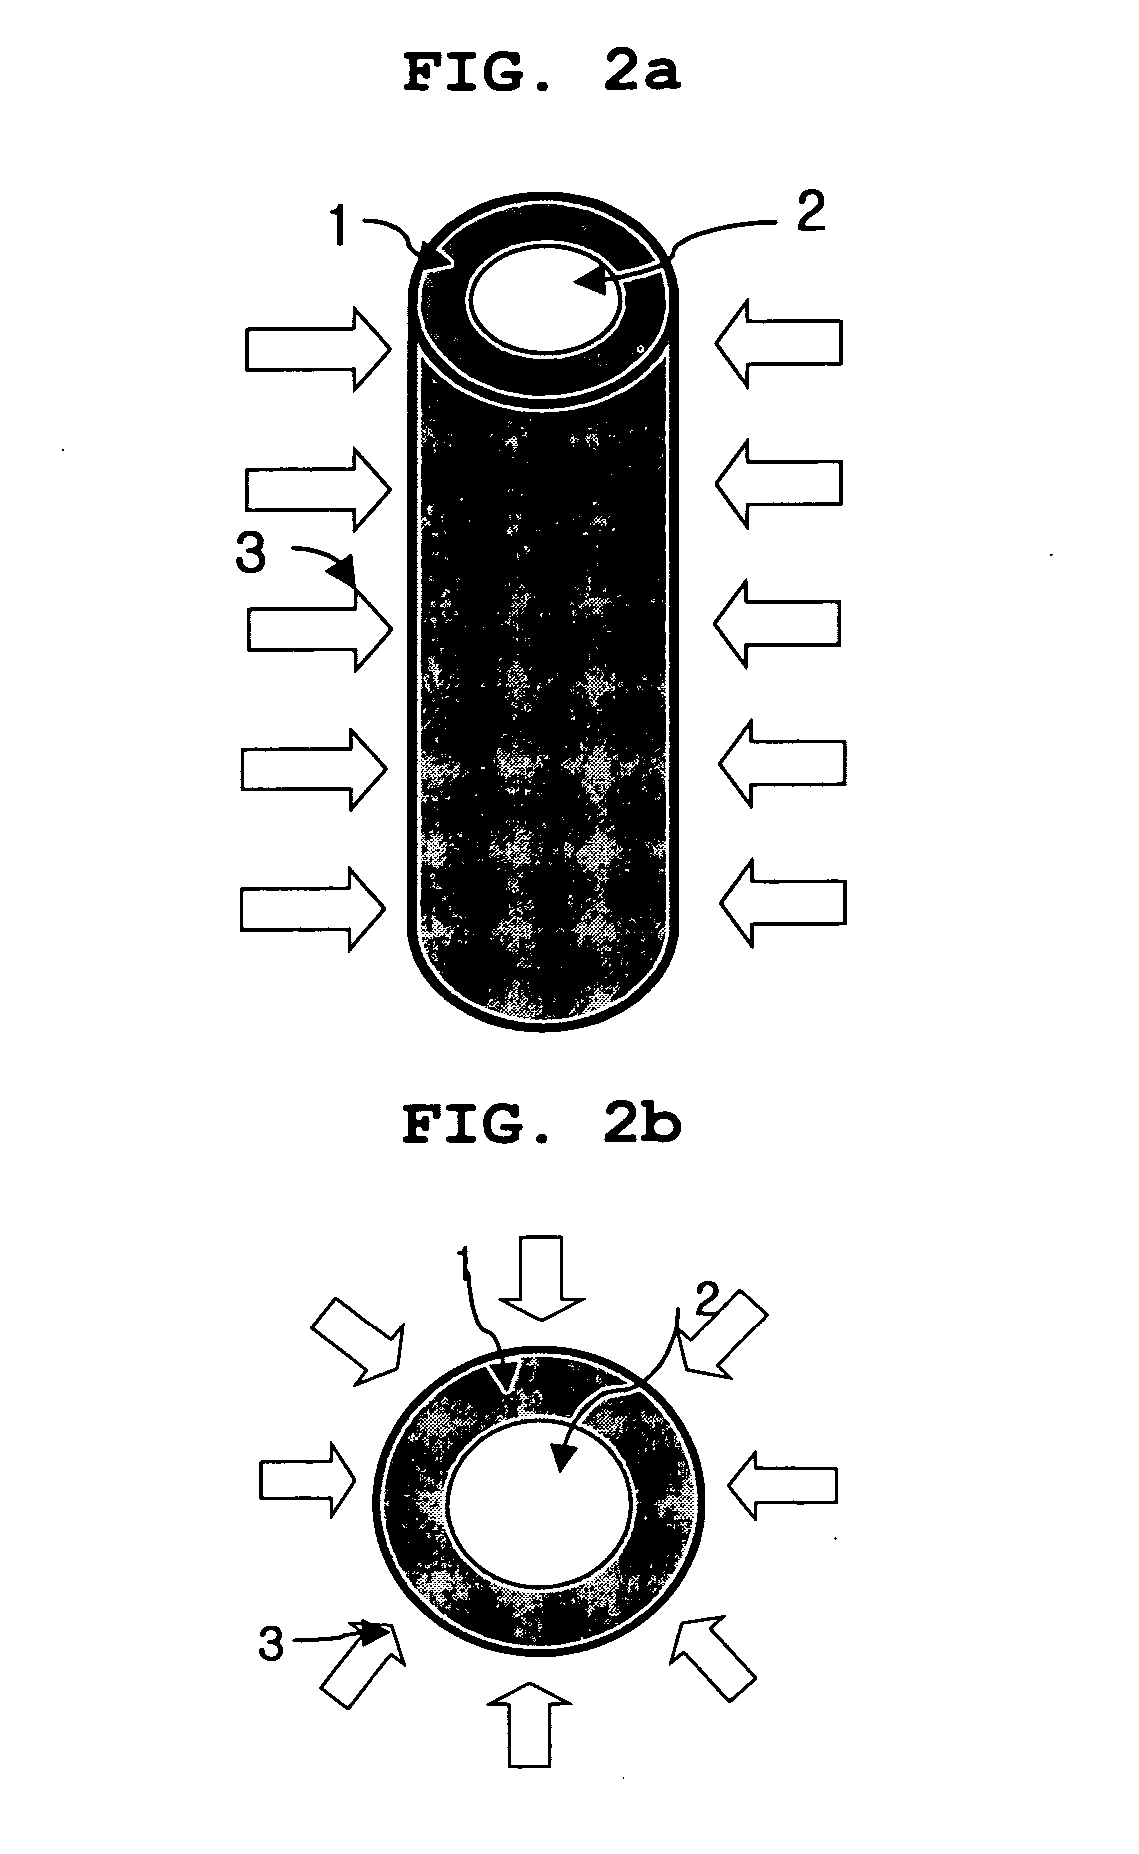 Multi-layered photobioreactor and method of culturing photosynthetic microorganisms using the same